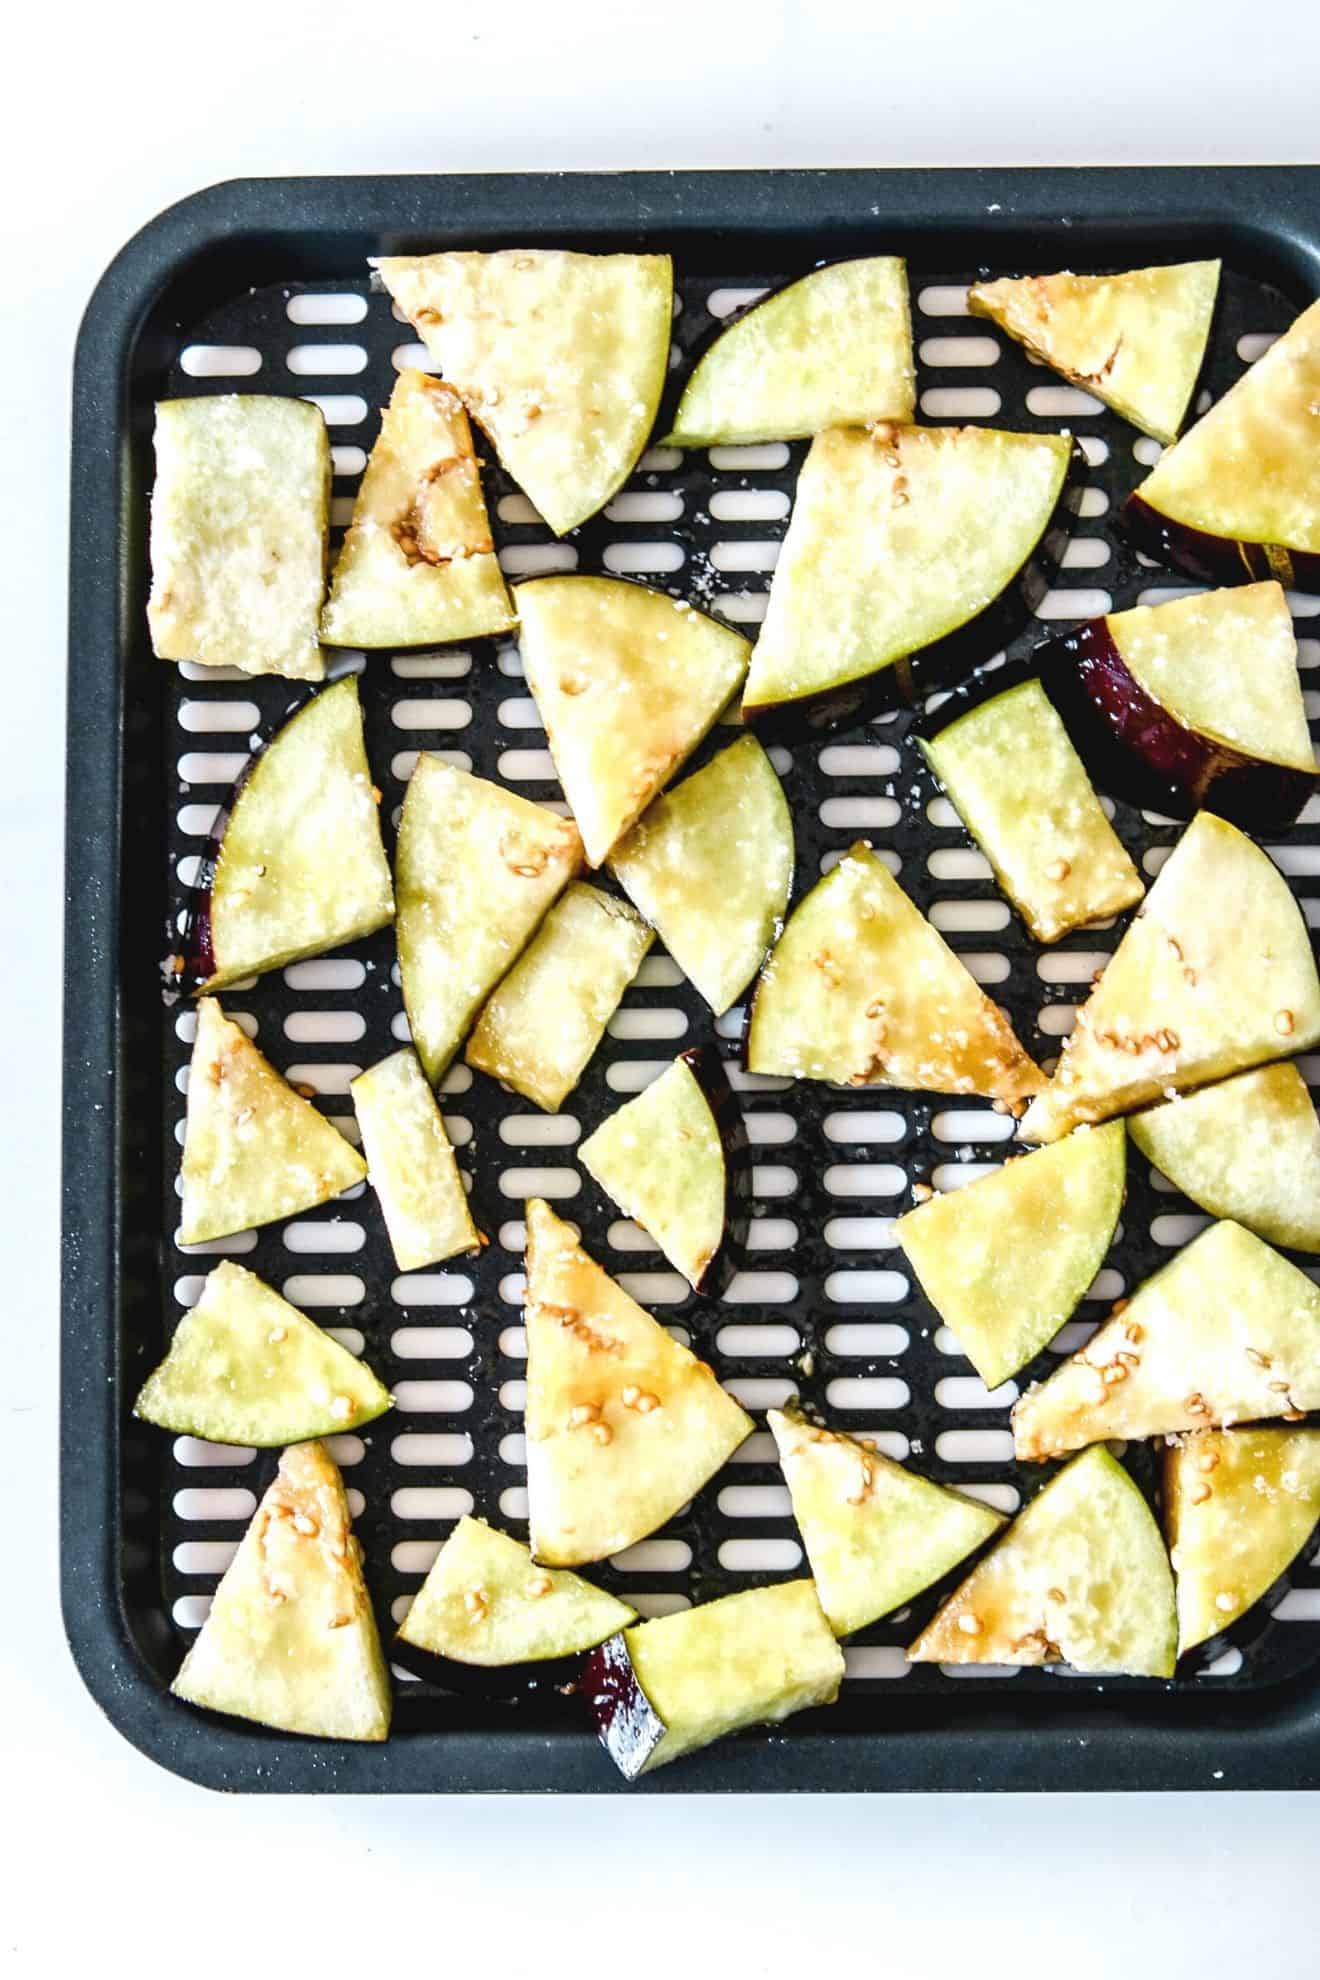 This is an overhead image of an air fryer tray with raw eggplant pieces on it. The eggplant is sprinkled with salt.